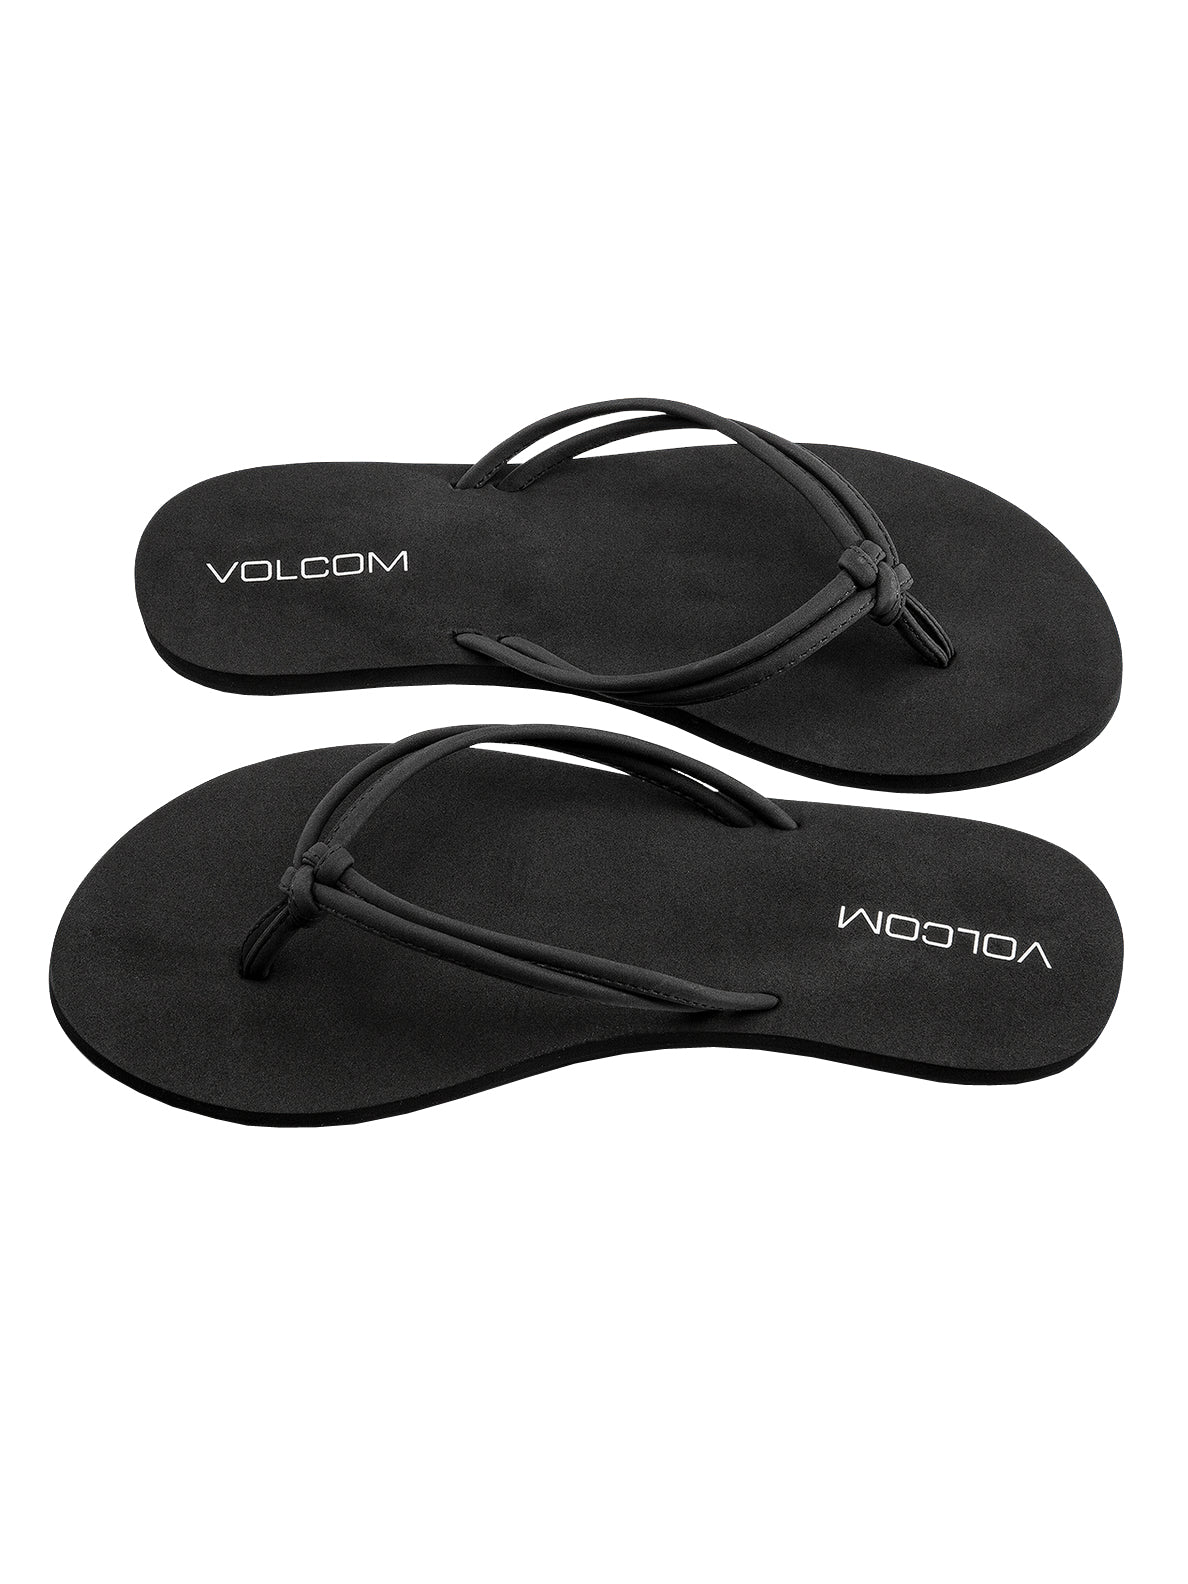 Volcom Forever and Ever 2 Womens Sandal BKO23-Black Out 10